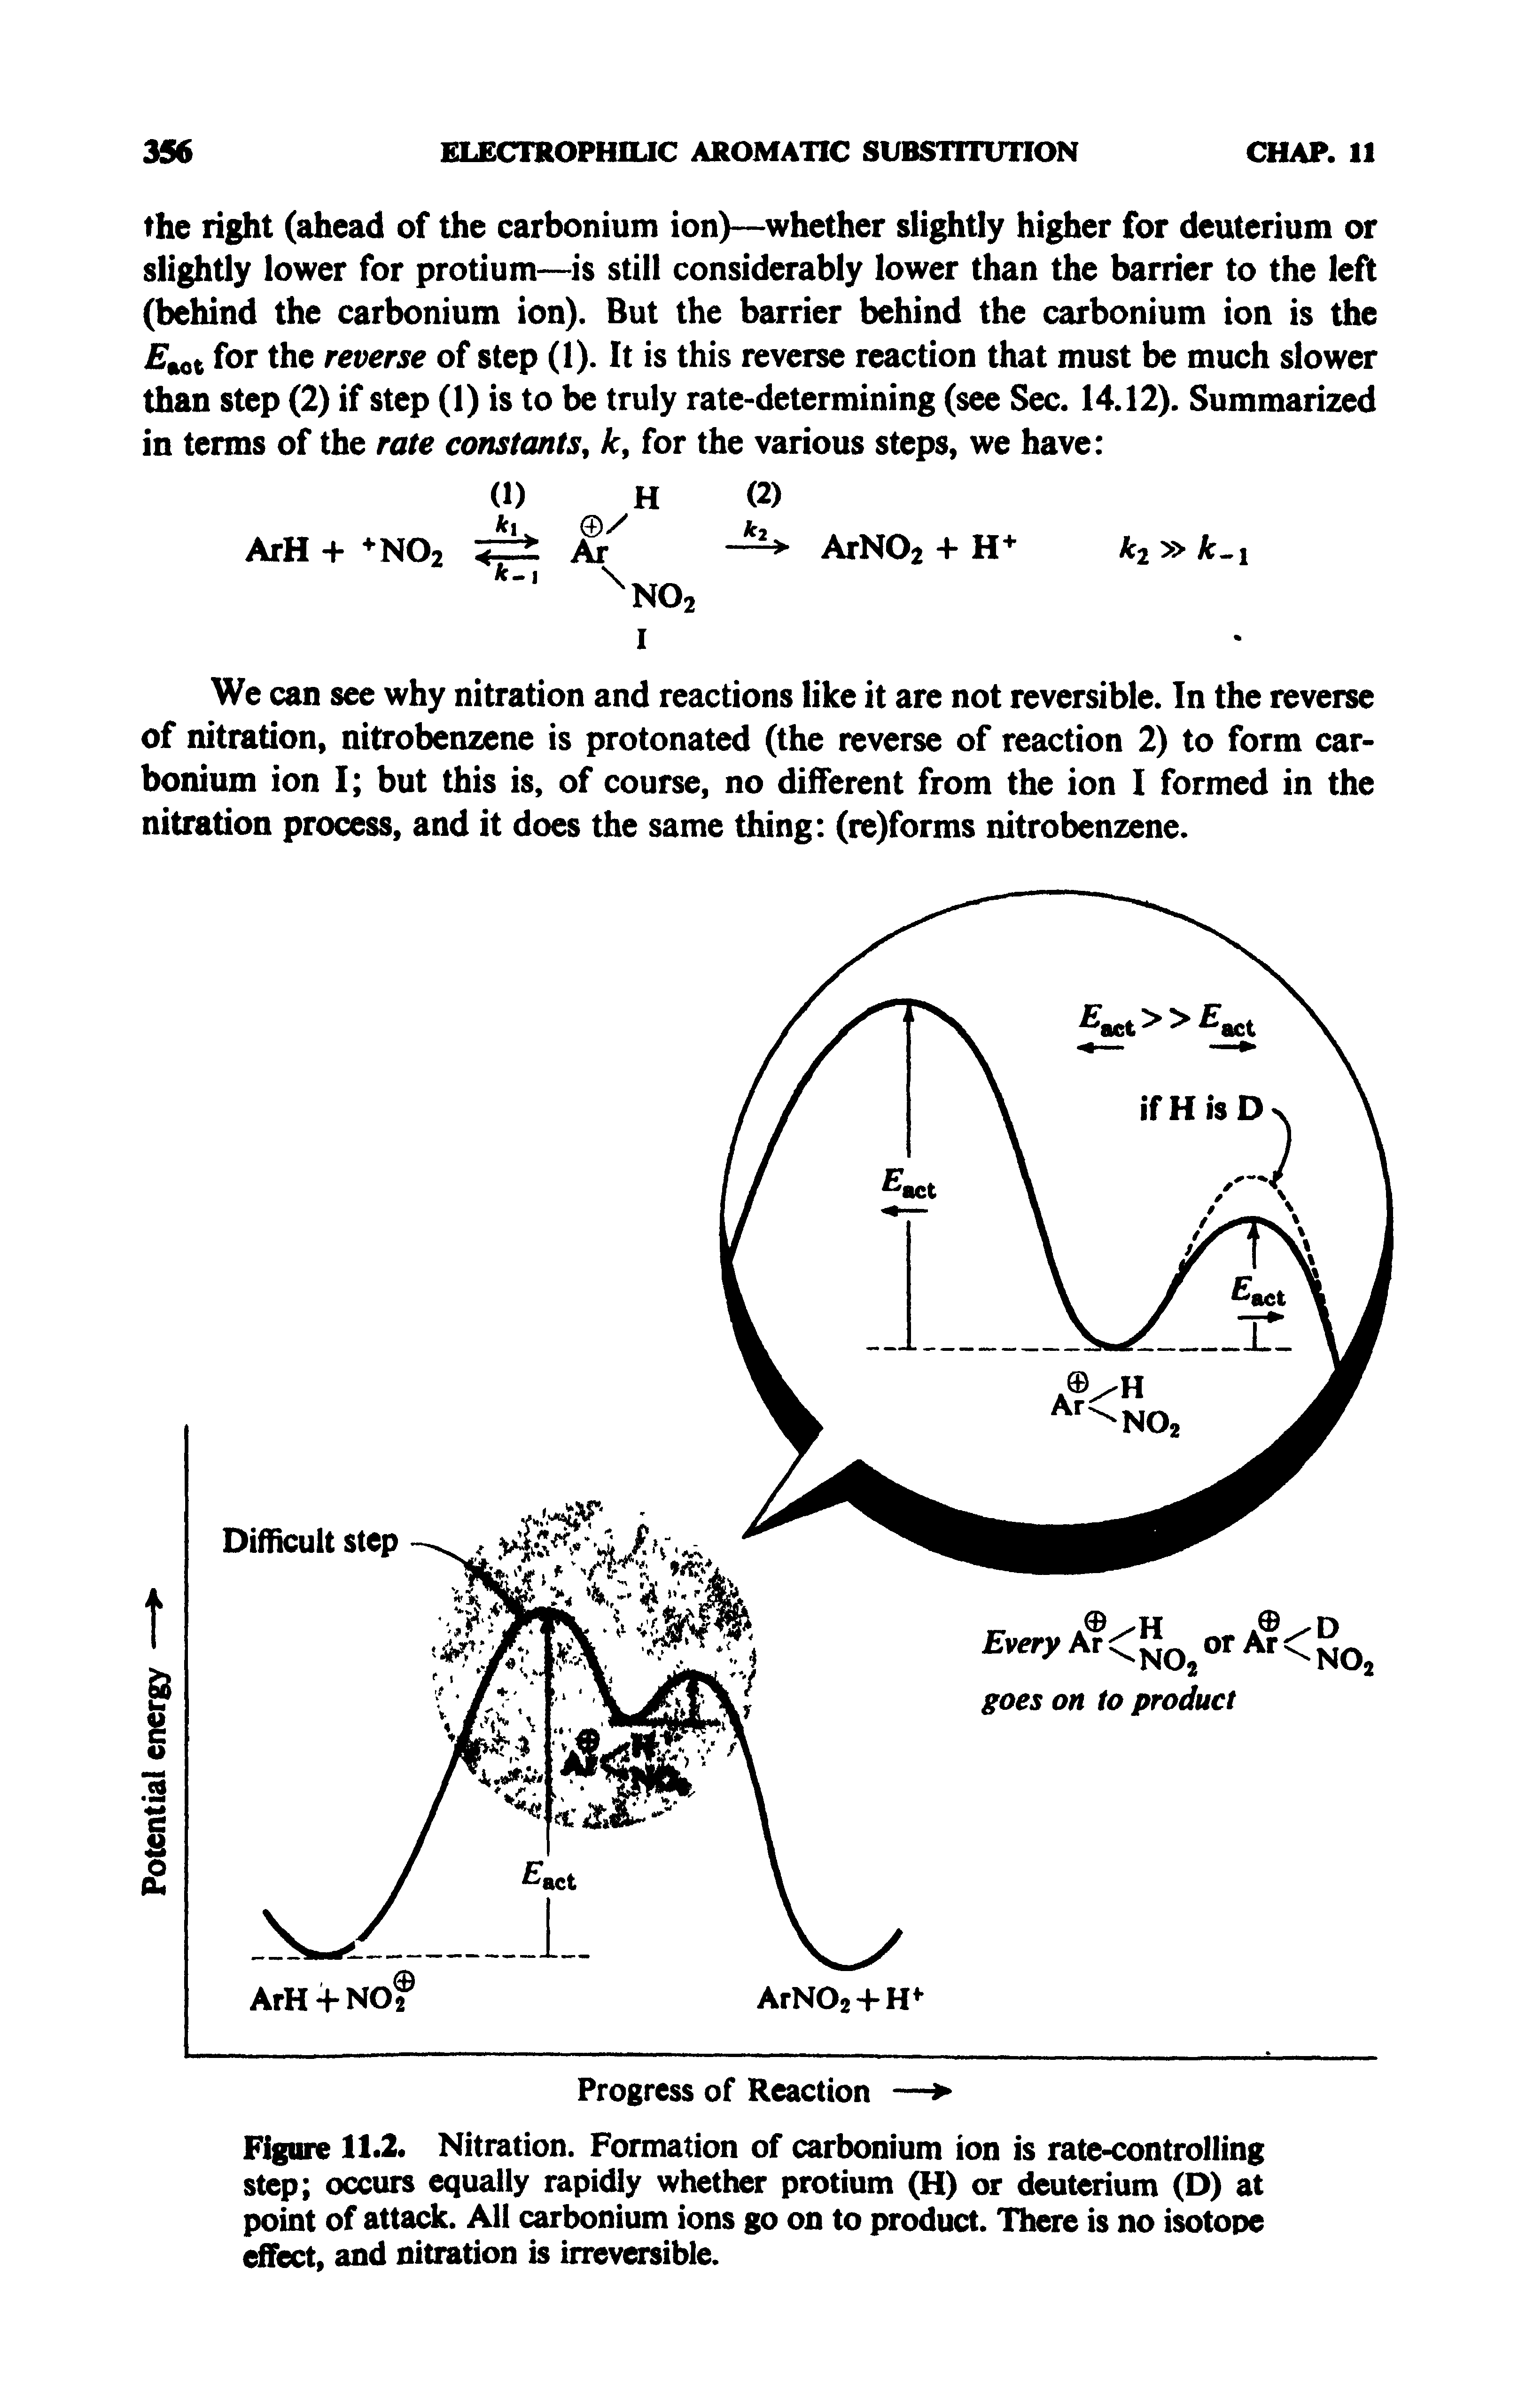 Figure 11 2. Nitration. Formation of carbonium ion is rate-controlling step occurs equally rapidly whether protium (H) or deuterium (D) at point of attack. All carbonium ions go on to product. There is no isotope effect, and nitration is irreversible.